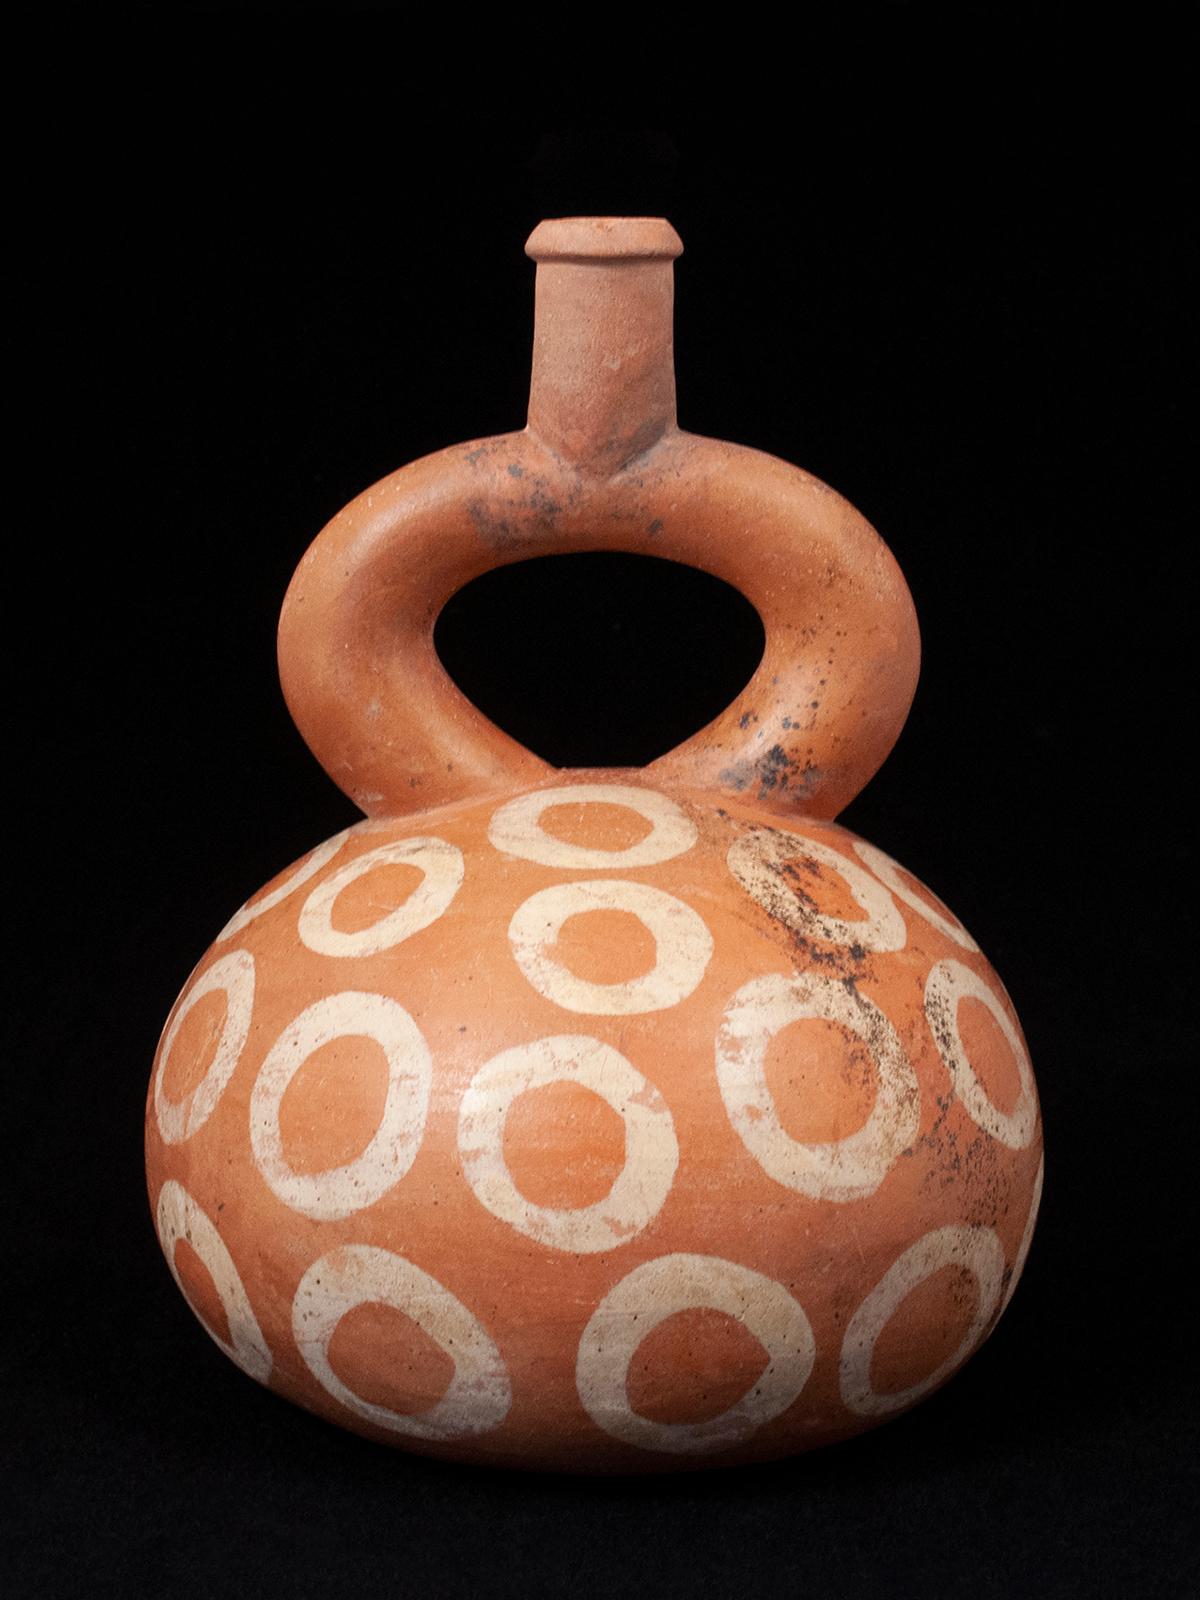 Pre-Columbian Moche stirrup vessel with cream-colored Circles, Peru

A graphic terracotta stirrup vessel with cream slip painted circles, with some natural mineral deposits. Measures: 5.5 inches (14 cm) diameter, 7.25 inches (16.4 cm) high.
Ex.